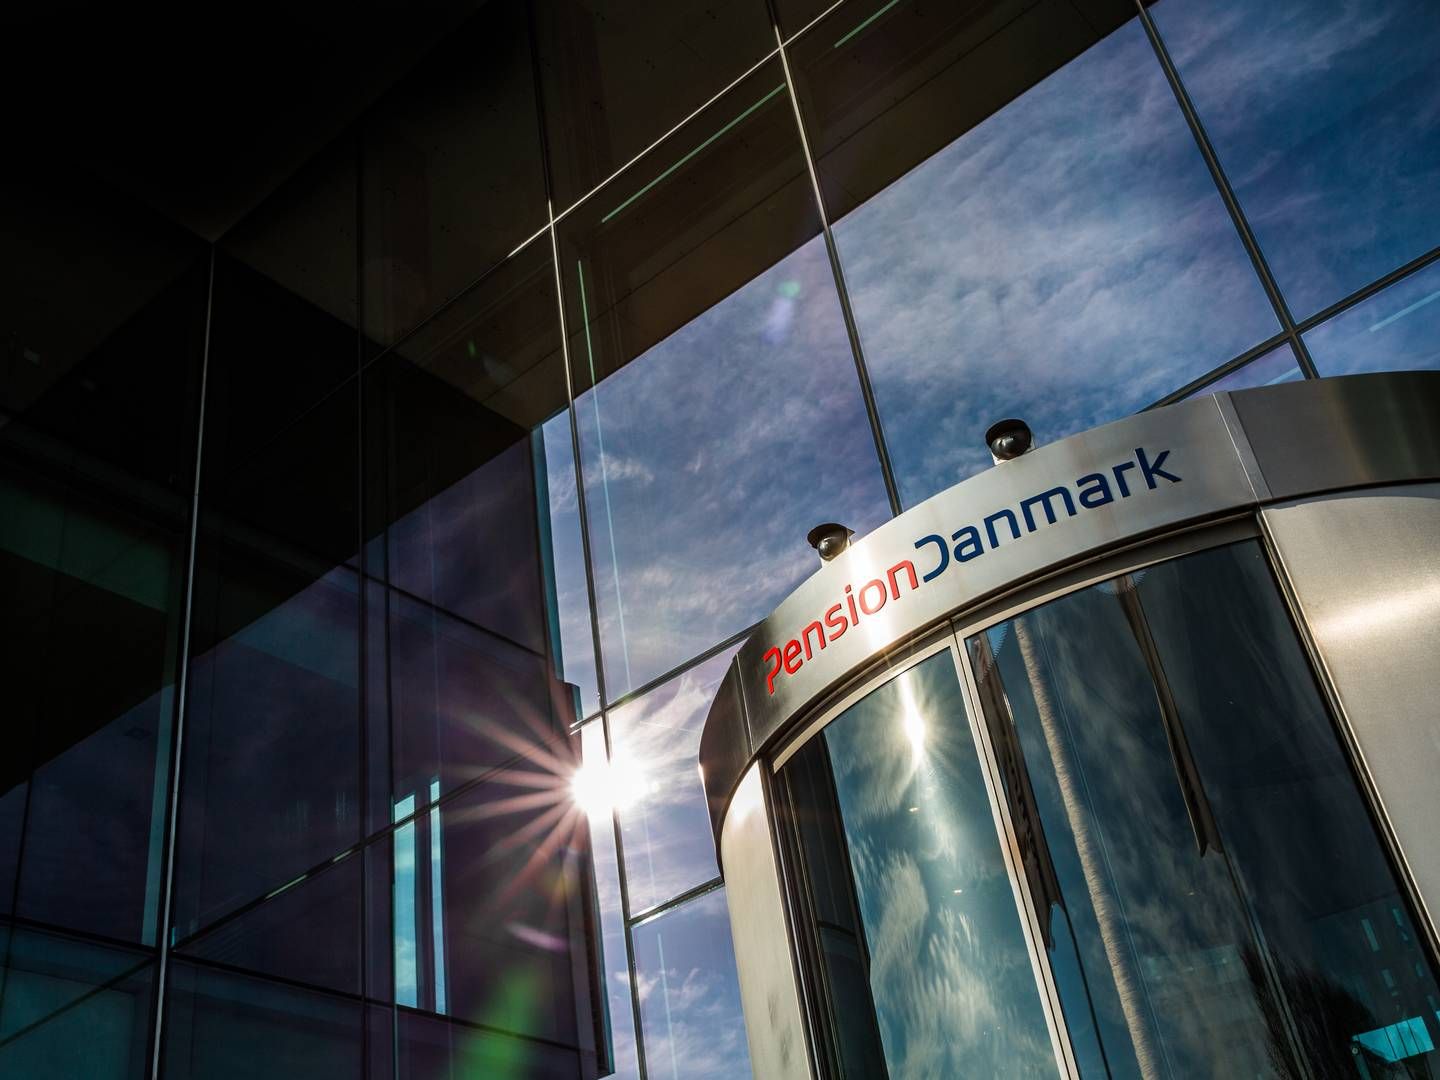 PensionDanmark has had Torben Möger Pedersen as CEO for the past 30 years. As he is now retiring, the boards of directors at PensionDanmark and Industriens Pension should consider the advantages of a merger, according to advisors. | Foto: Pensiondanmark/pr